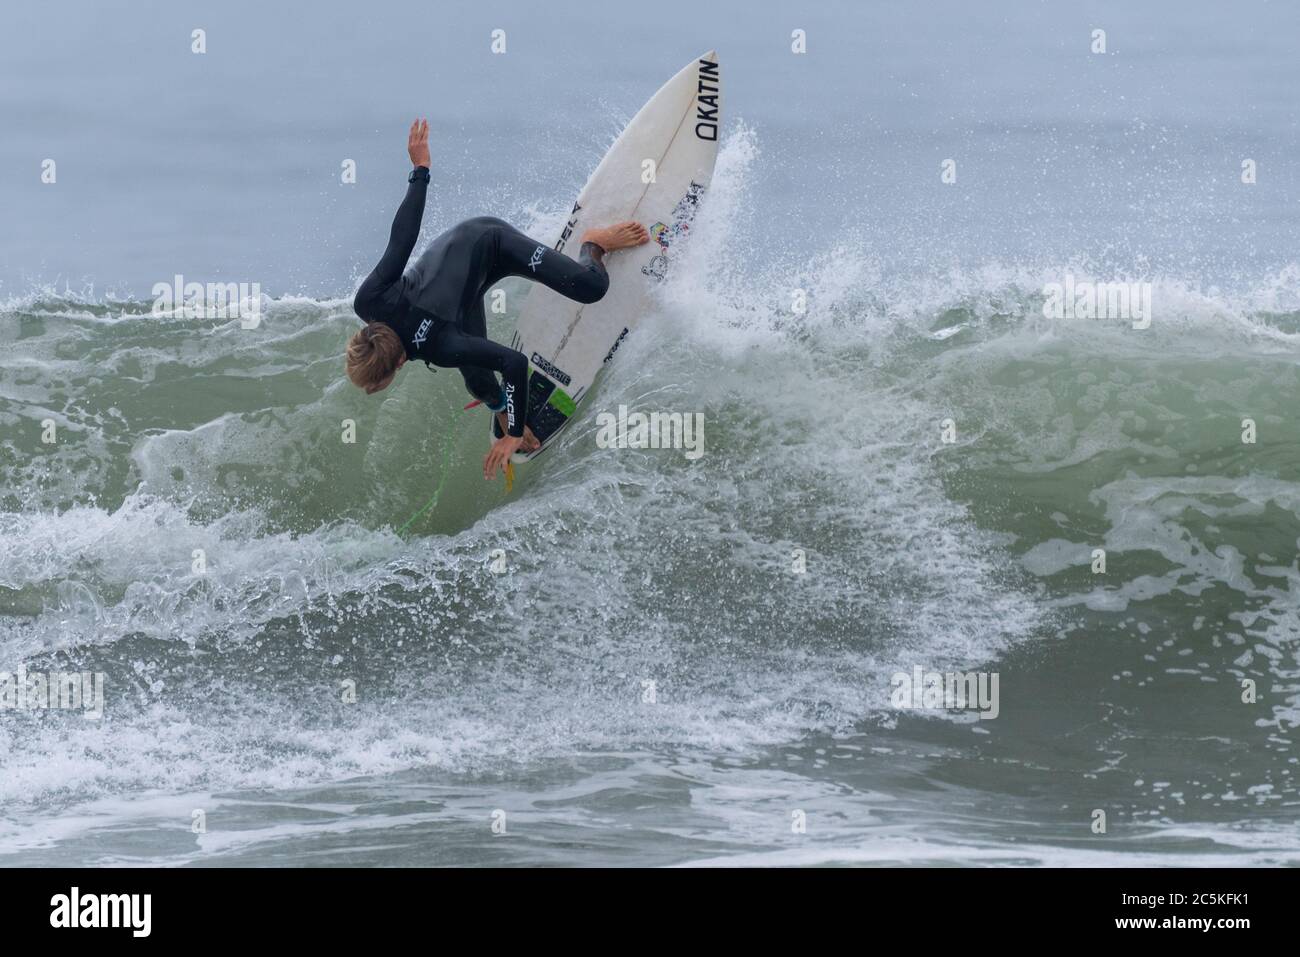 Young male surfer aggressively turns hard off the lip of a breaking wave at Surfer's Knoll in Ventura, California, USA on July 2, 2020. Stock Photo